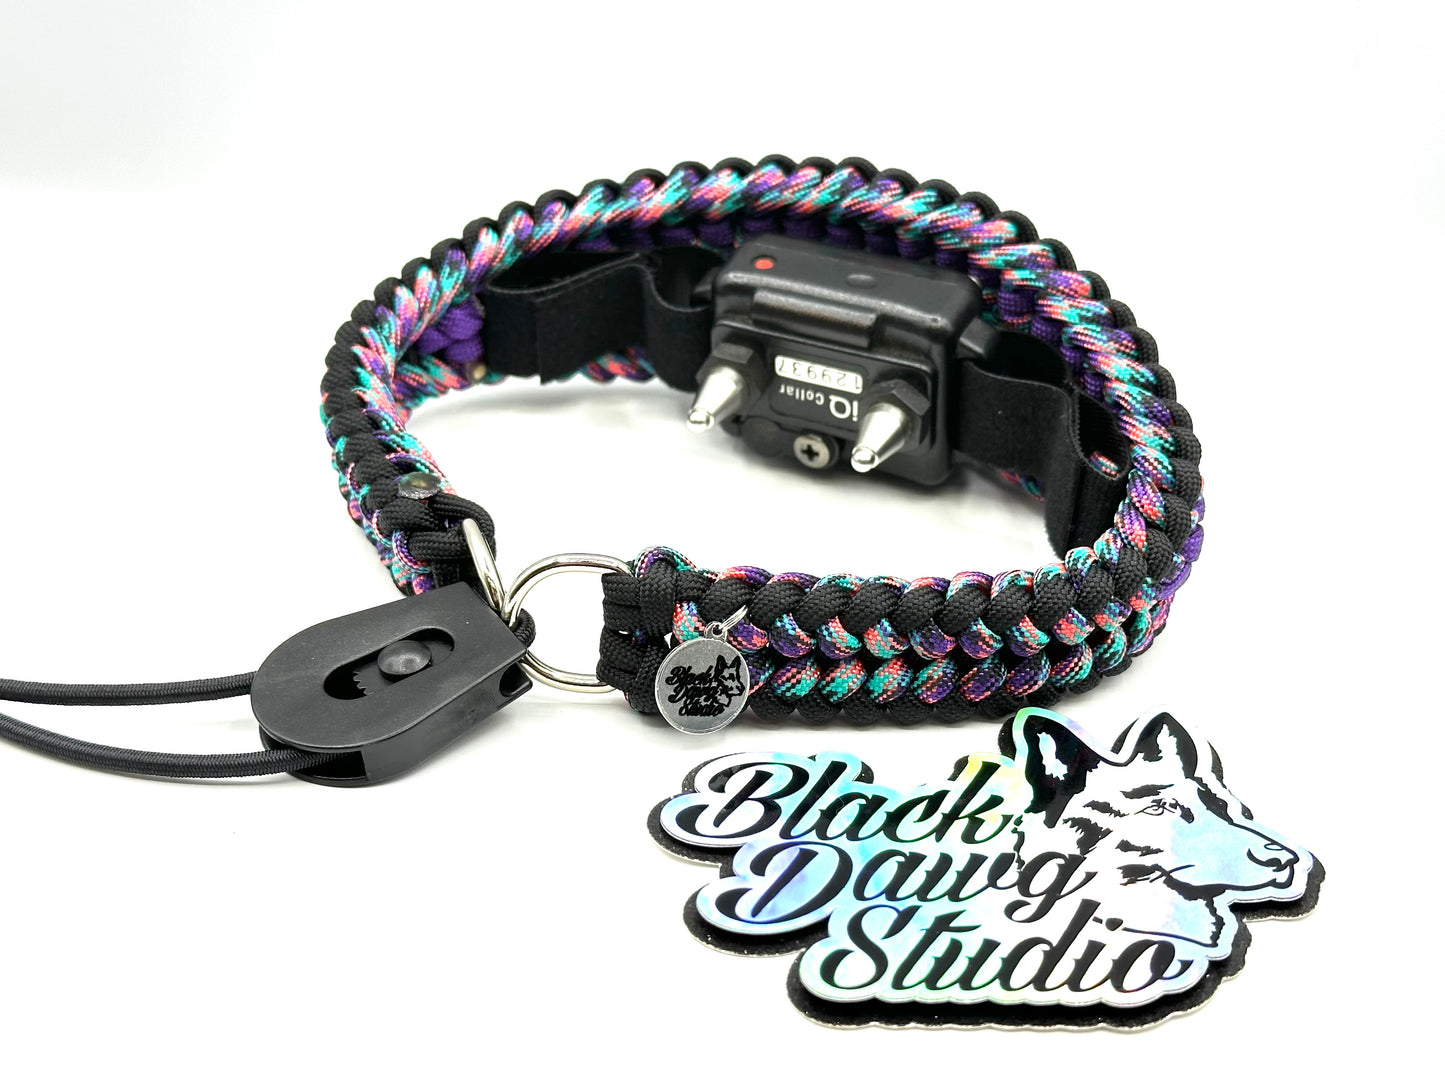 e-Secret Keeper Paracord Collar - Electric/Remote Training Collar Cover - Black, Fusion, Acid Purple, Fusion, and Teal